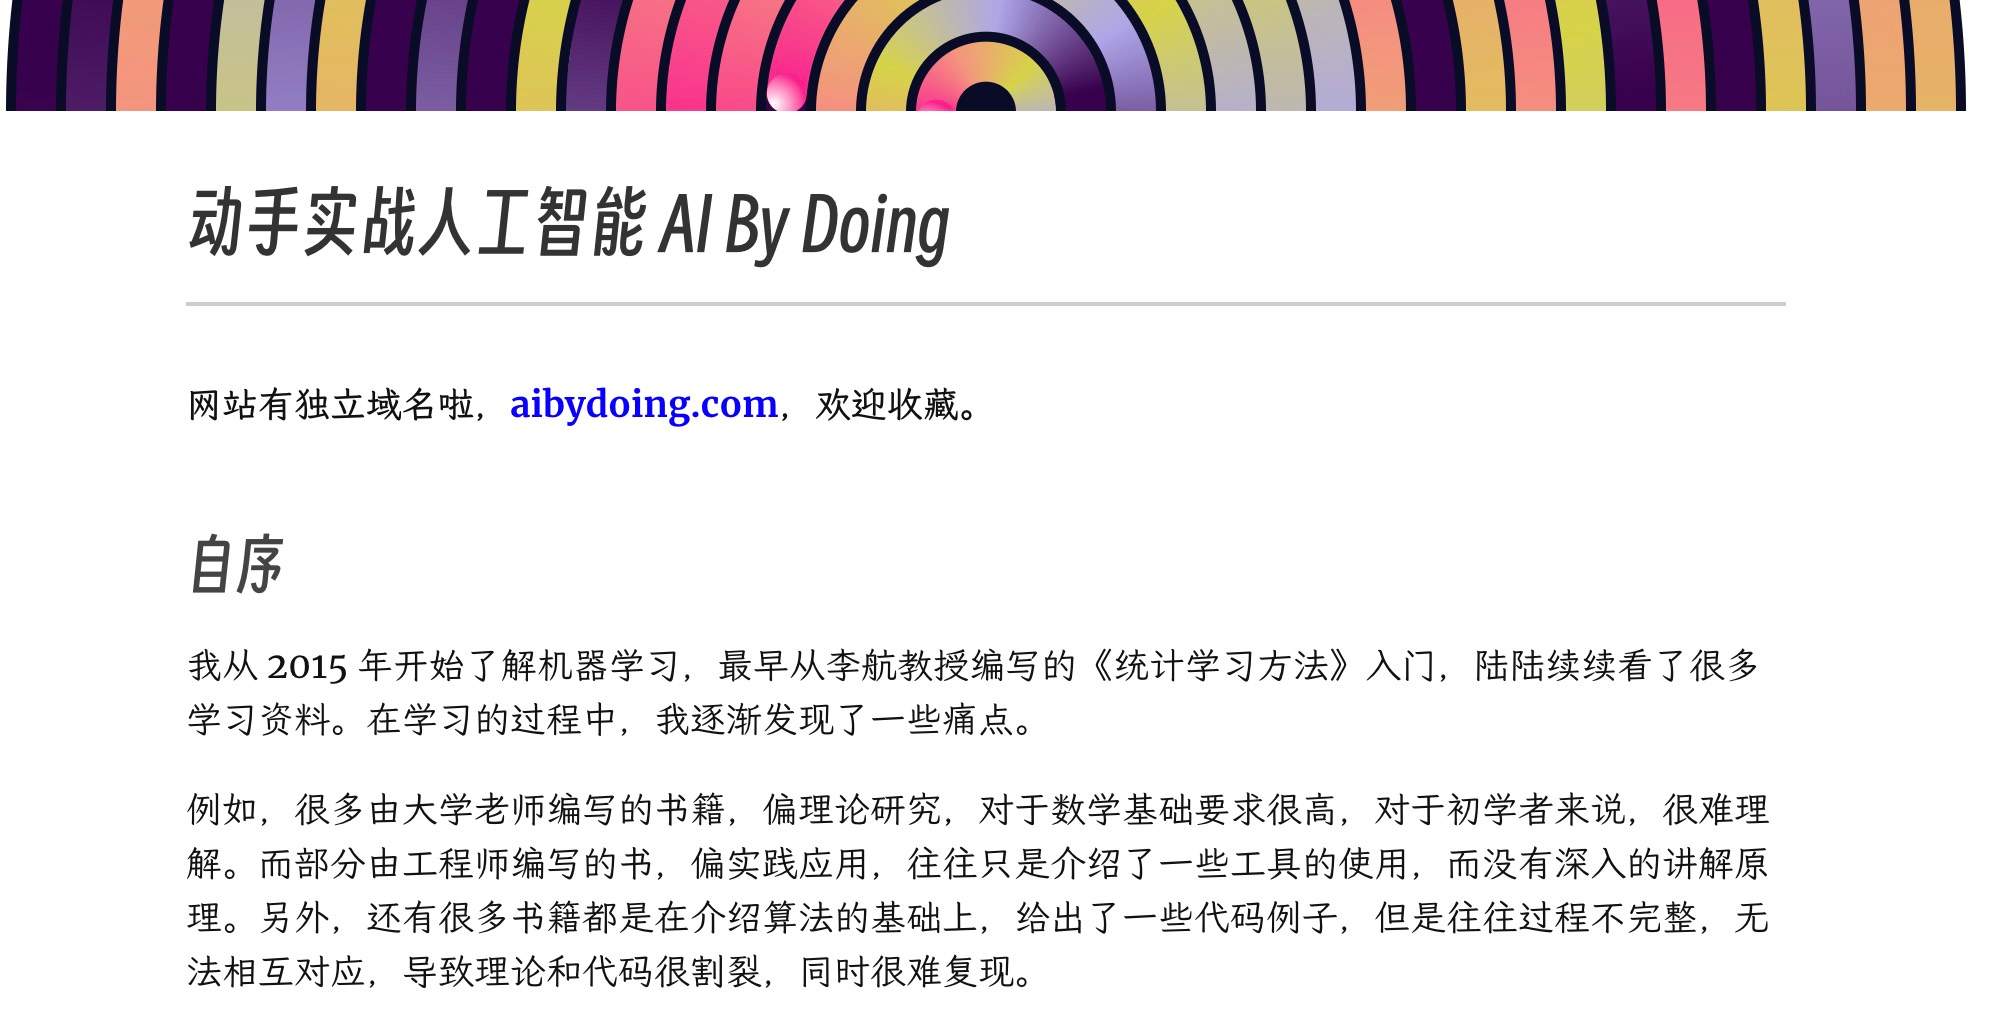 aibydoing